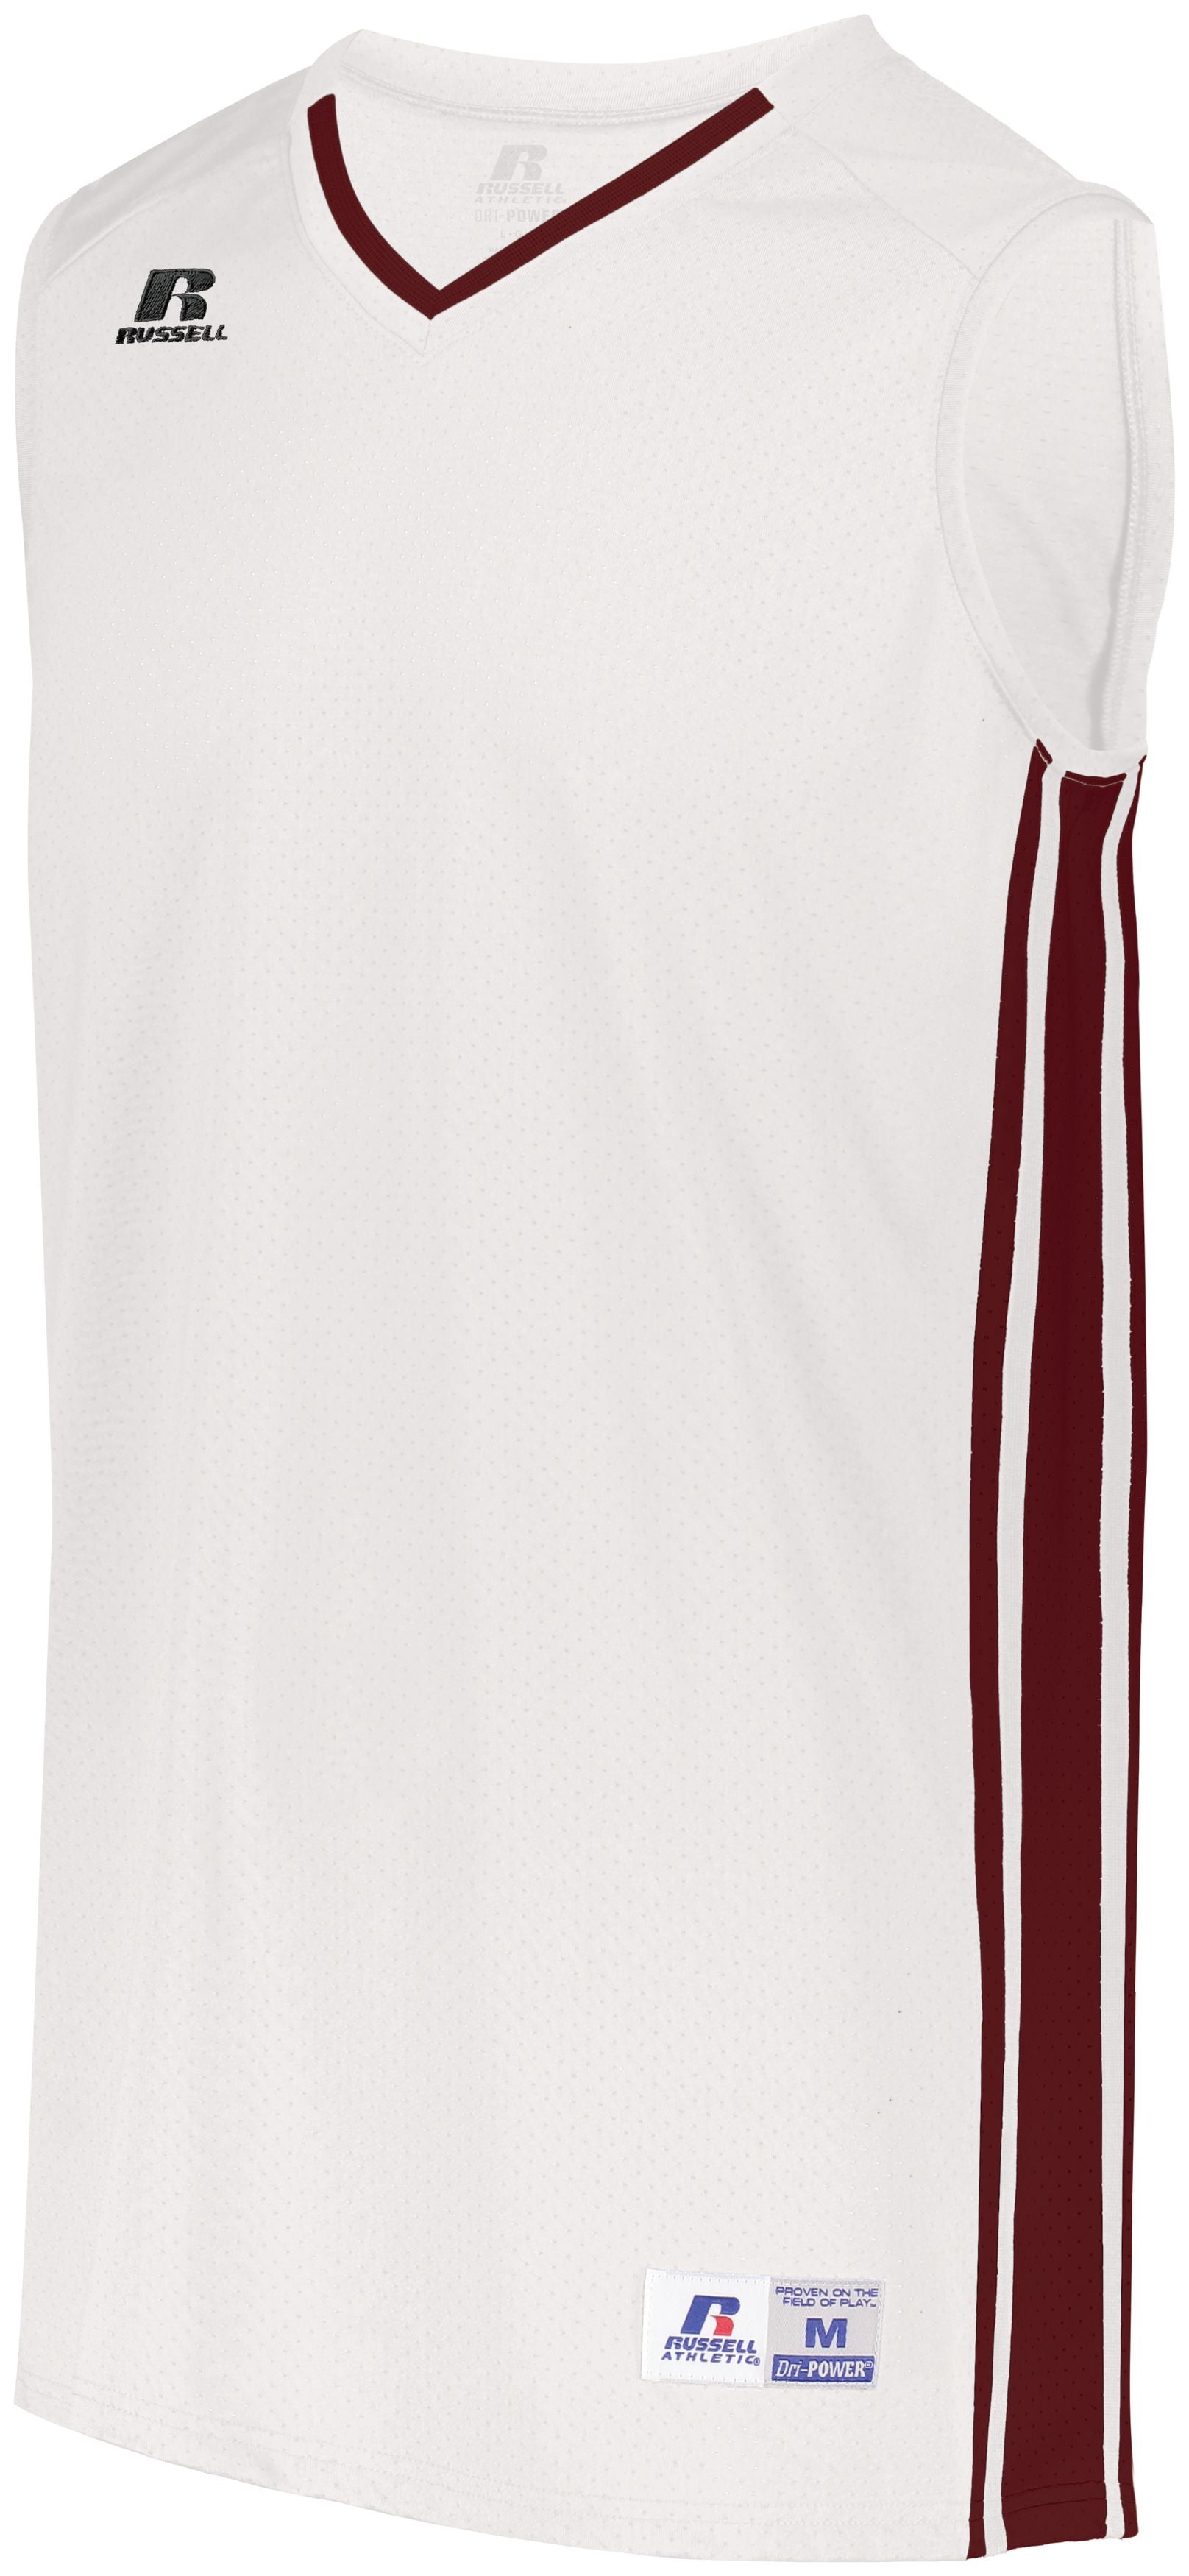 Russell Athletic Youth Legacy Basketball Jersey in White/Cardinal  -Part of the Youth, Youth-Jersey, Basketball, Russell-Athletic-Products, Shirts, All-Sports, All-Sports-1 product lines at KanaleyCreations.com